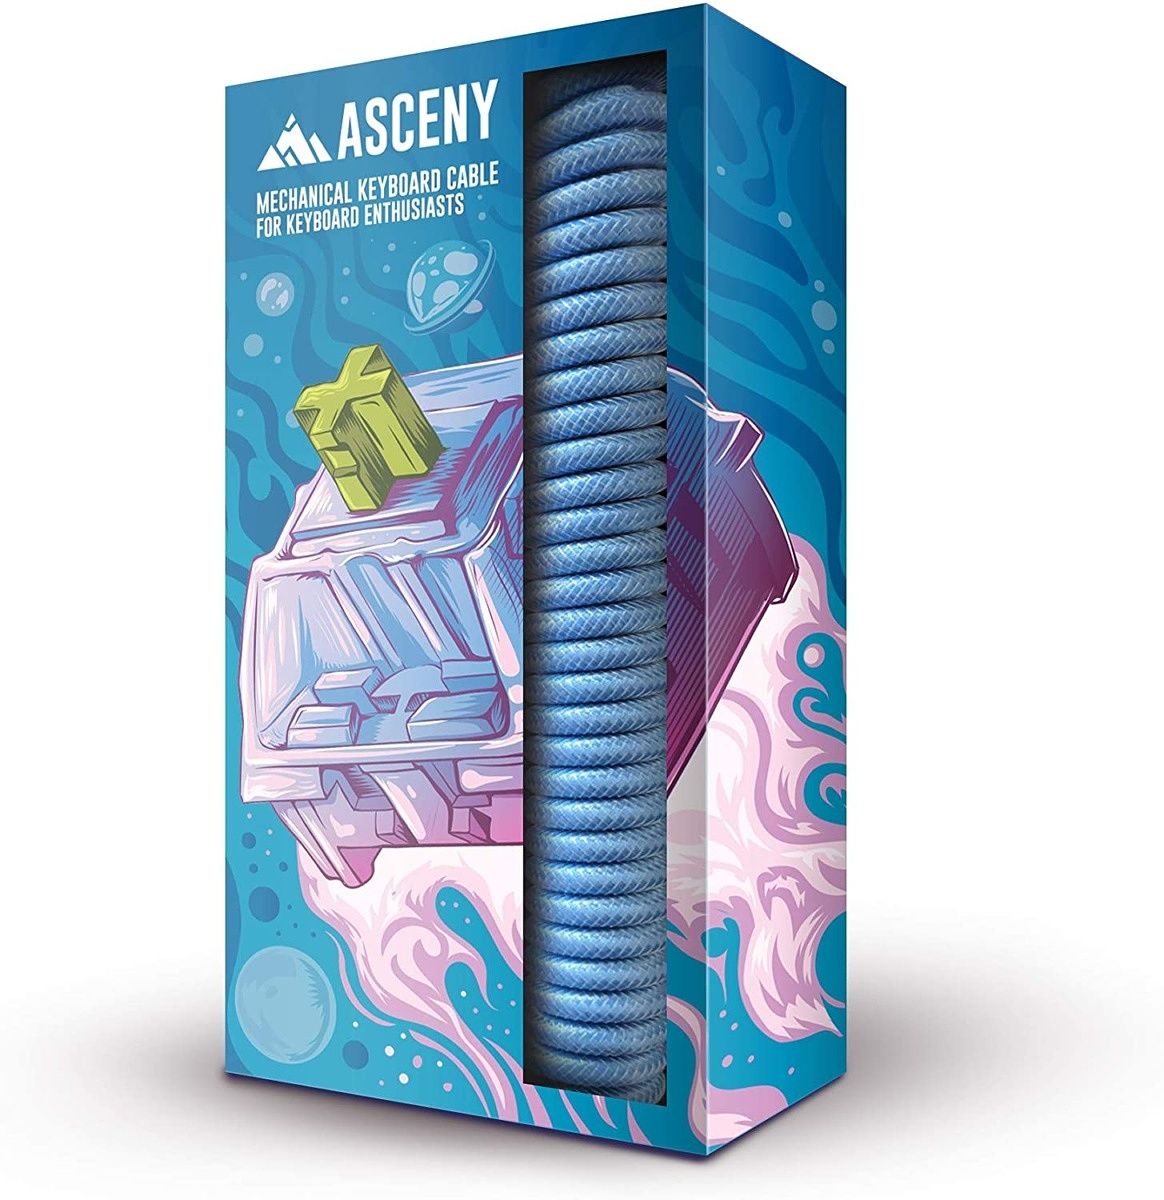 Asceny is one of the many brands that offer coiled and braided cables for mechanical keyboards.